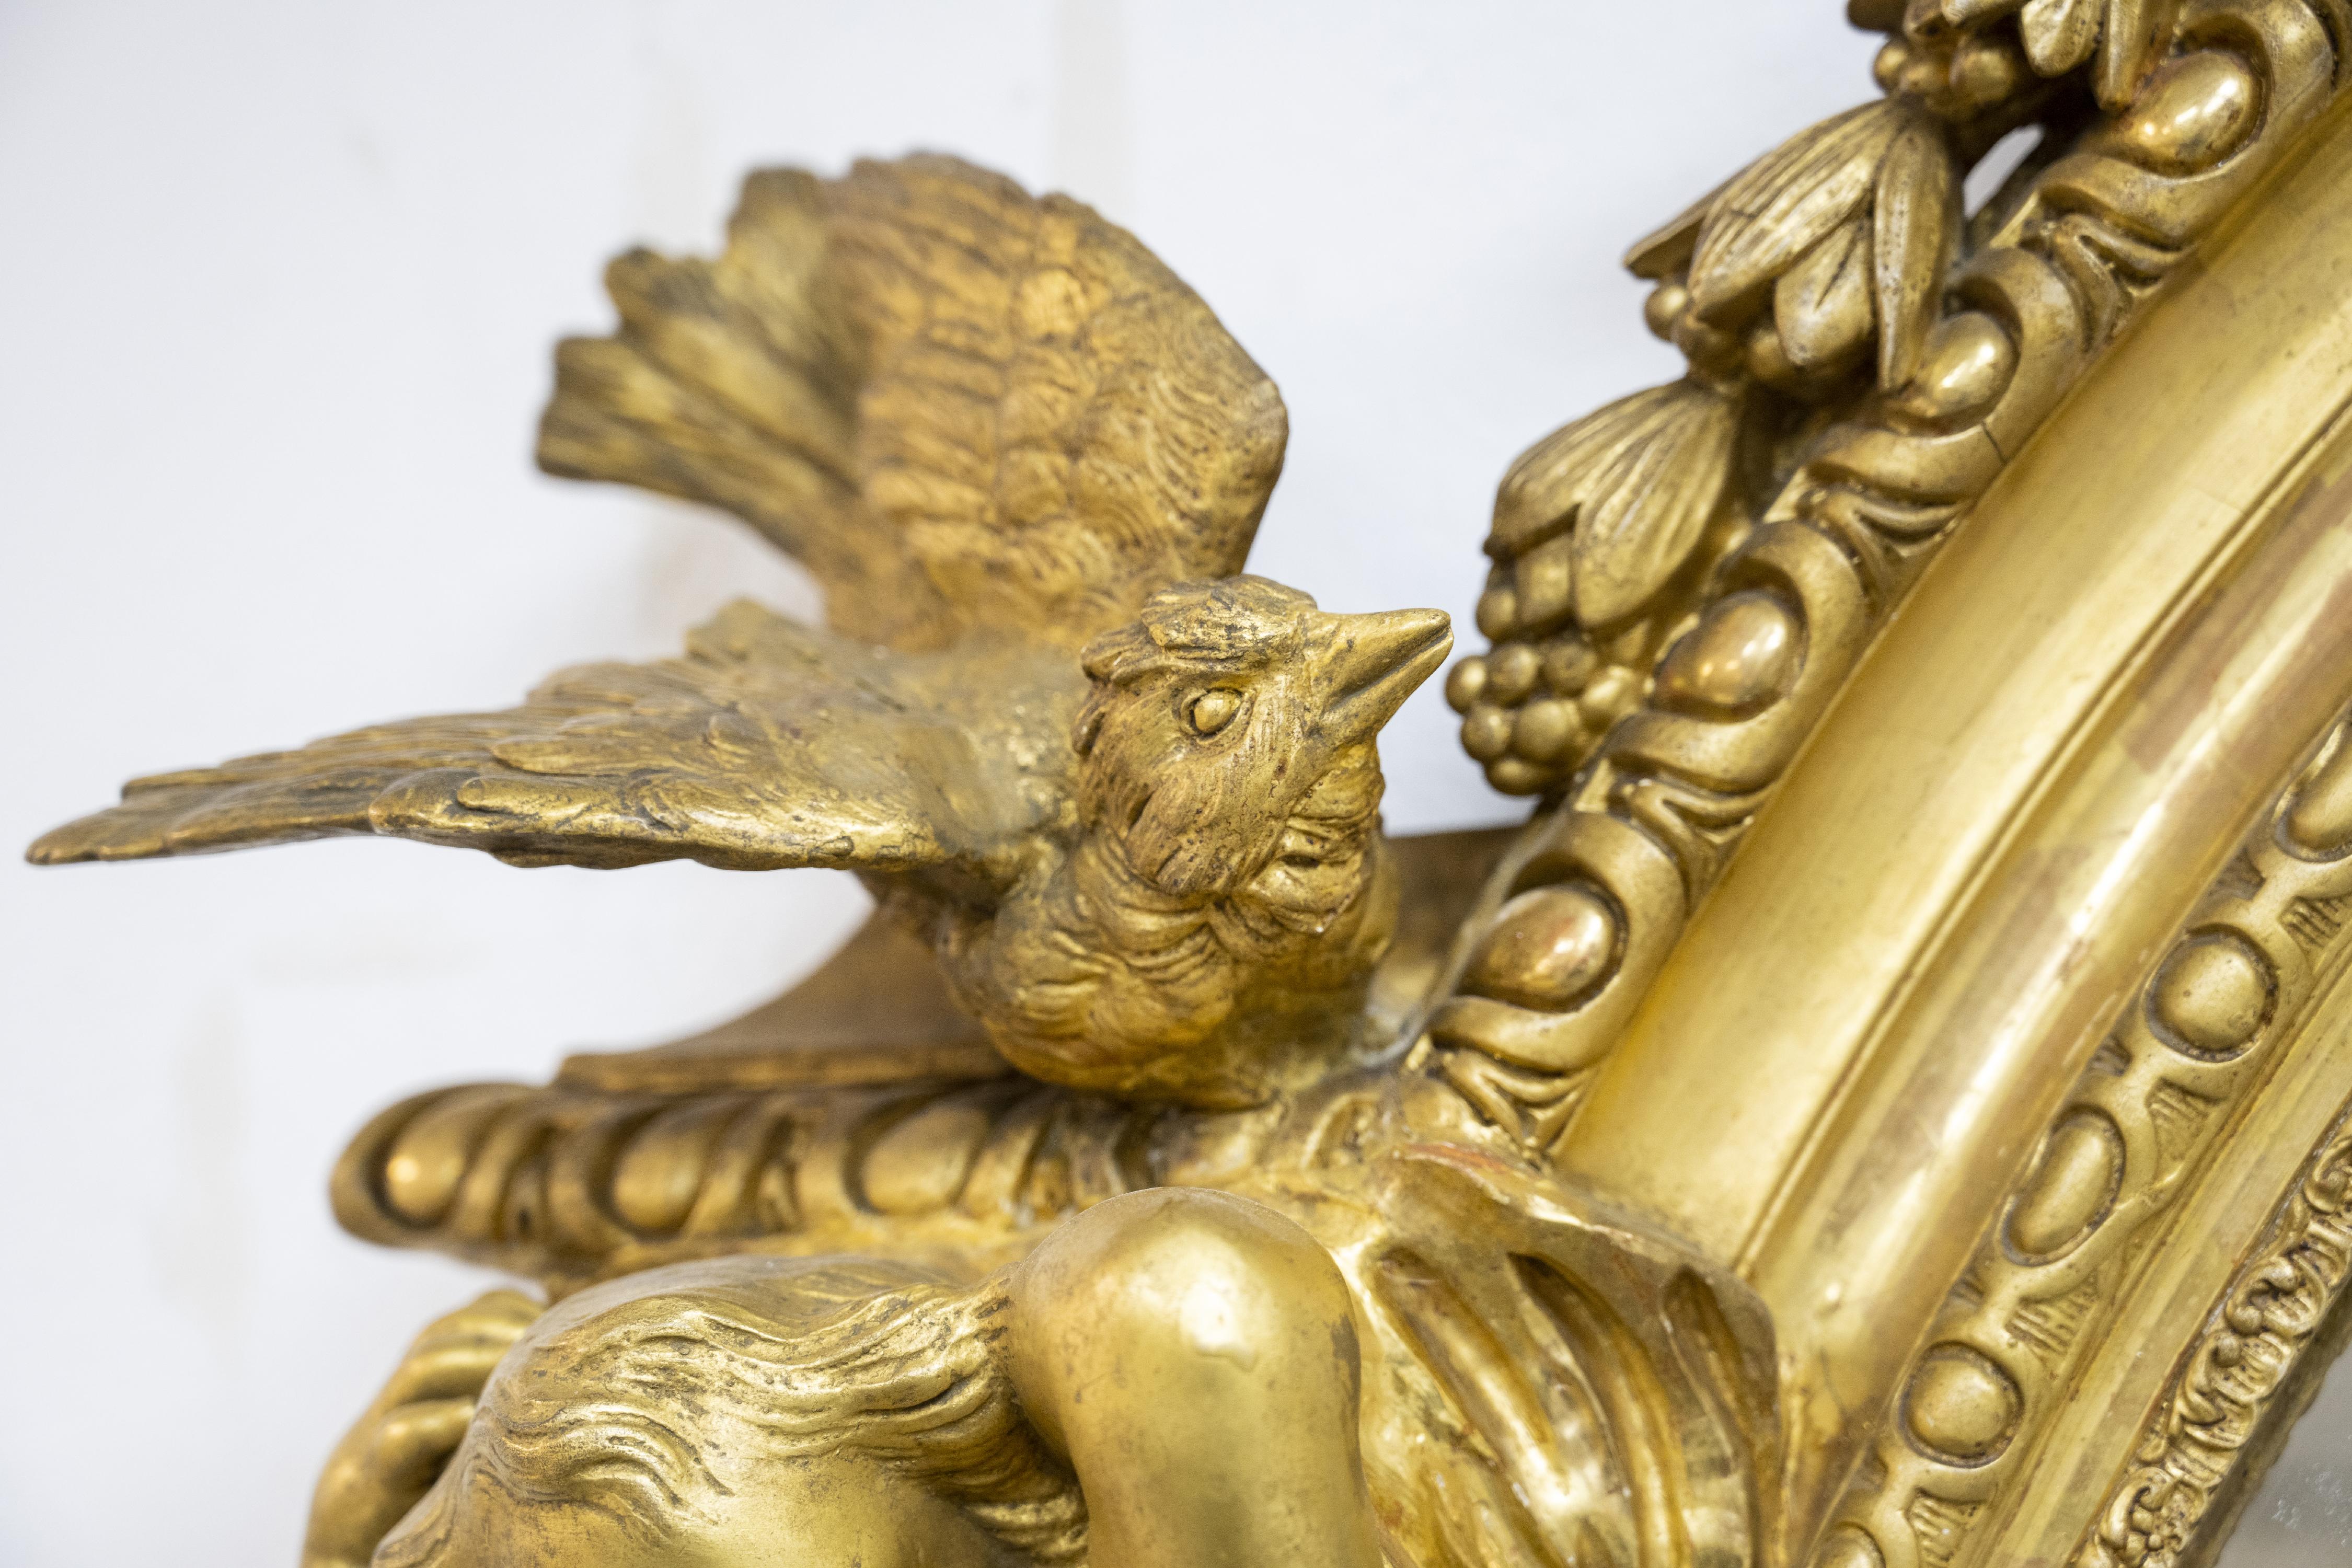 19th Century Large Gilded Trumeau with Birds, Putti and Woman’s Face on Openwork Decoration